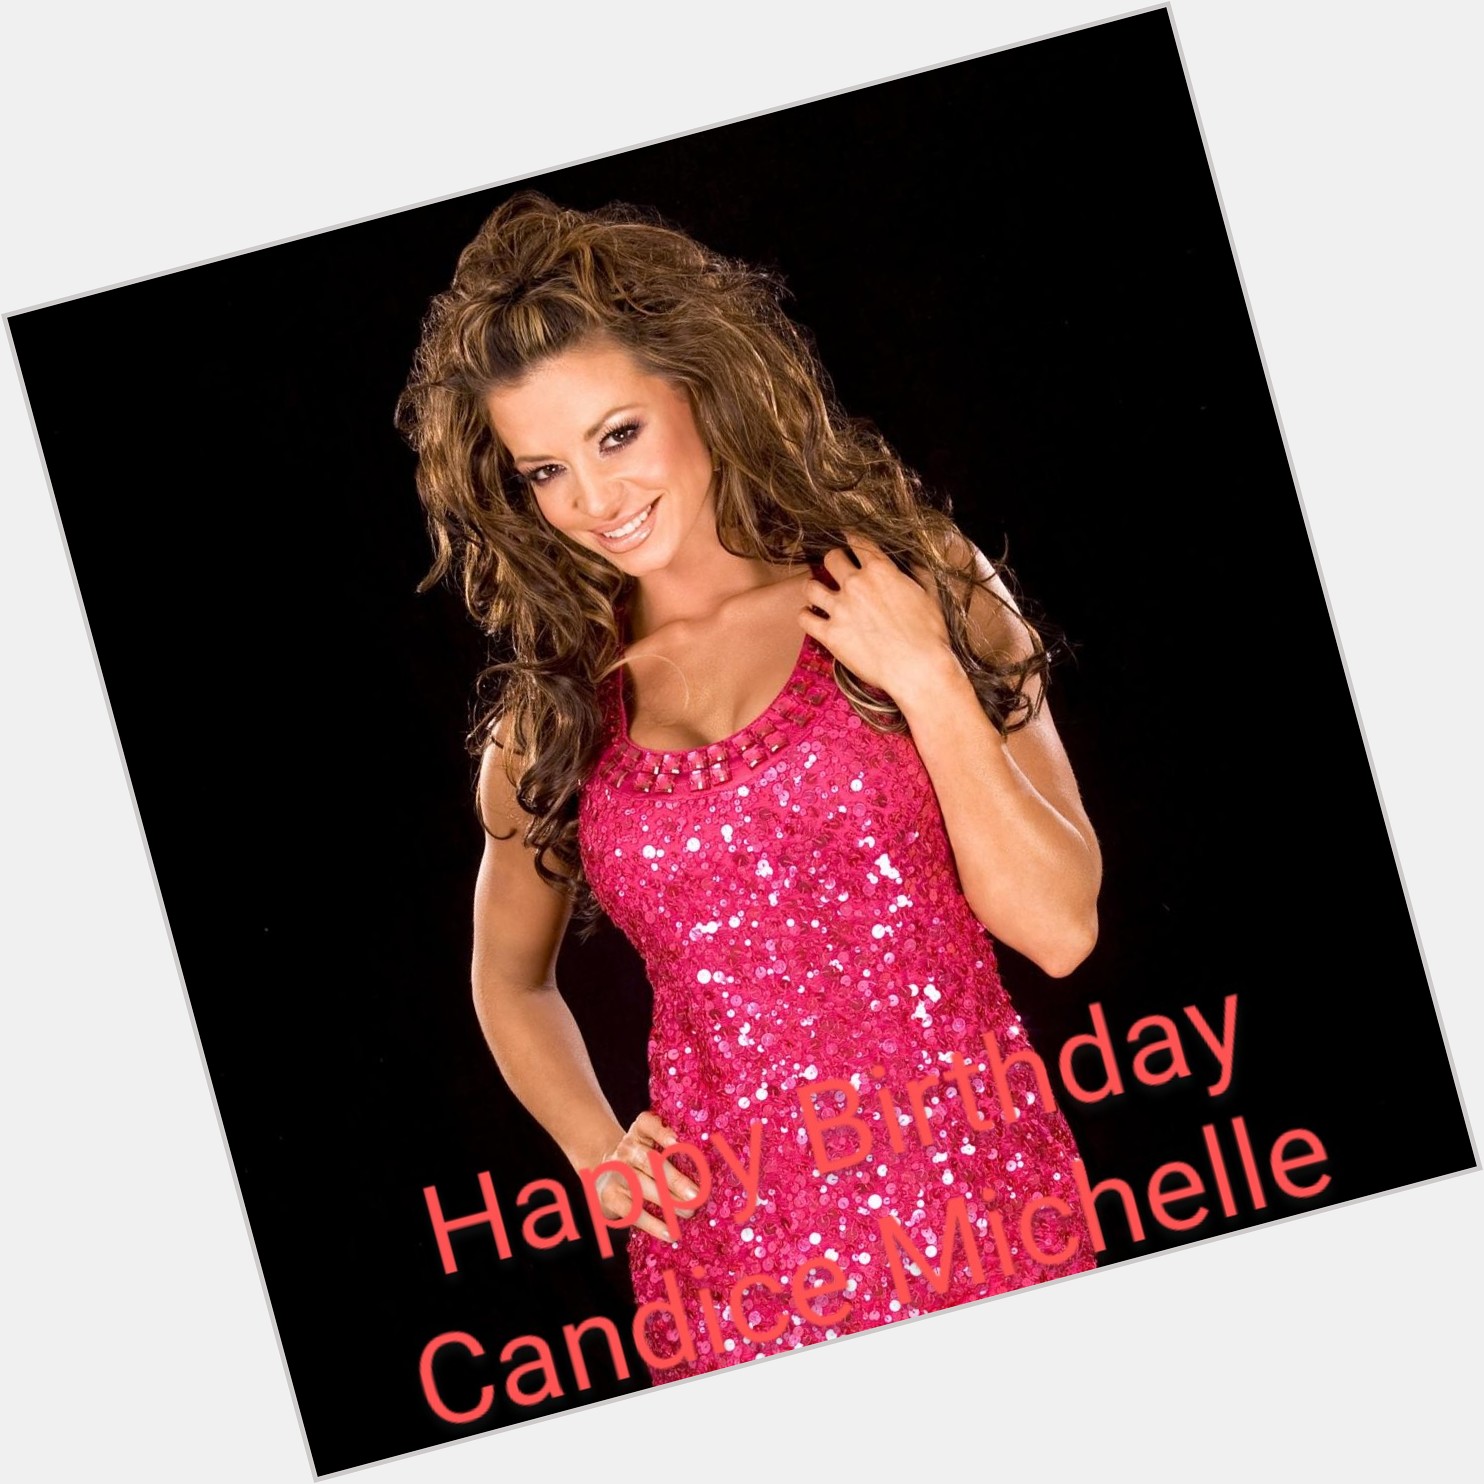 Happy birthday to you  candice michelle 